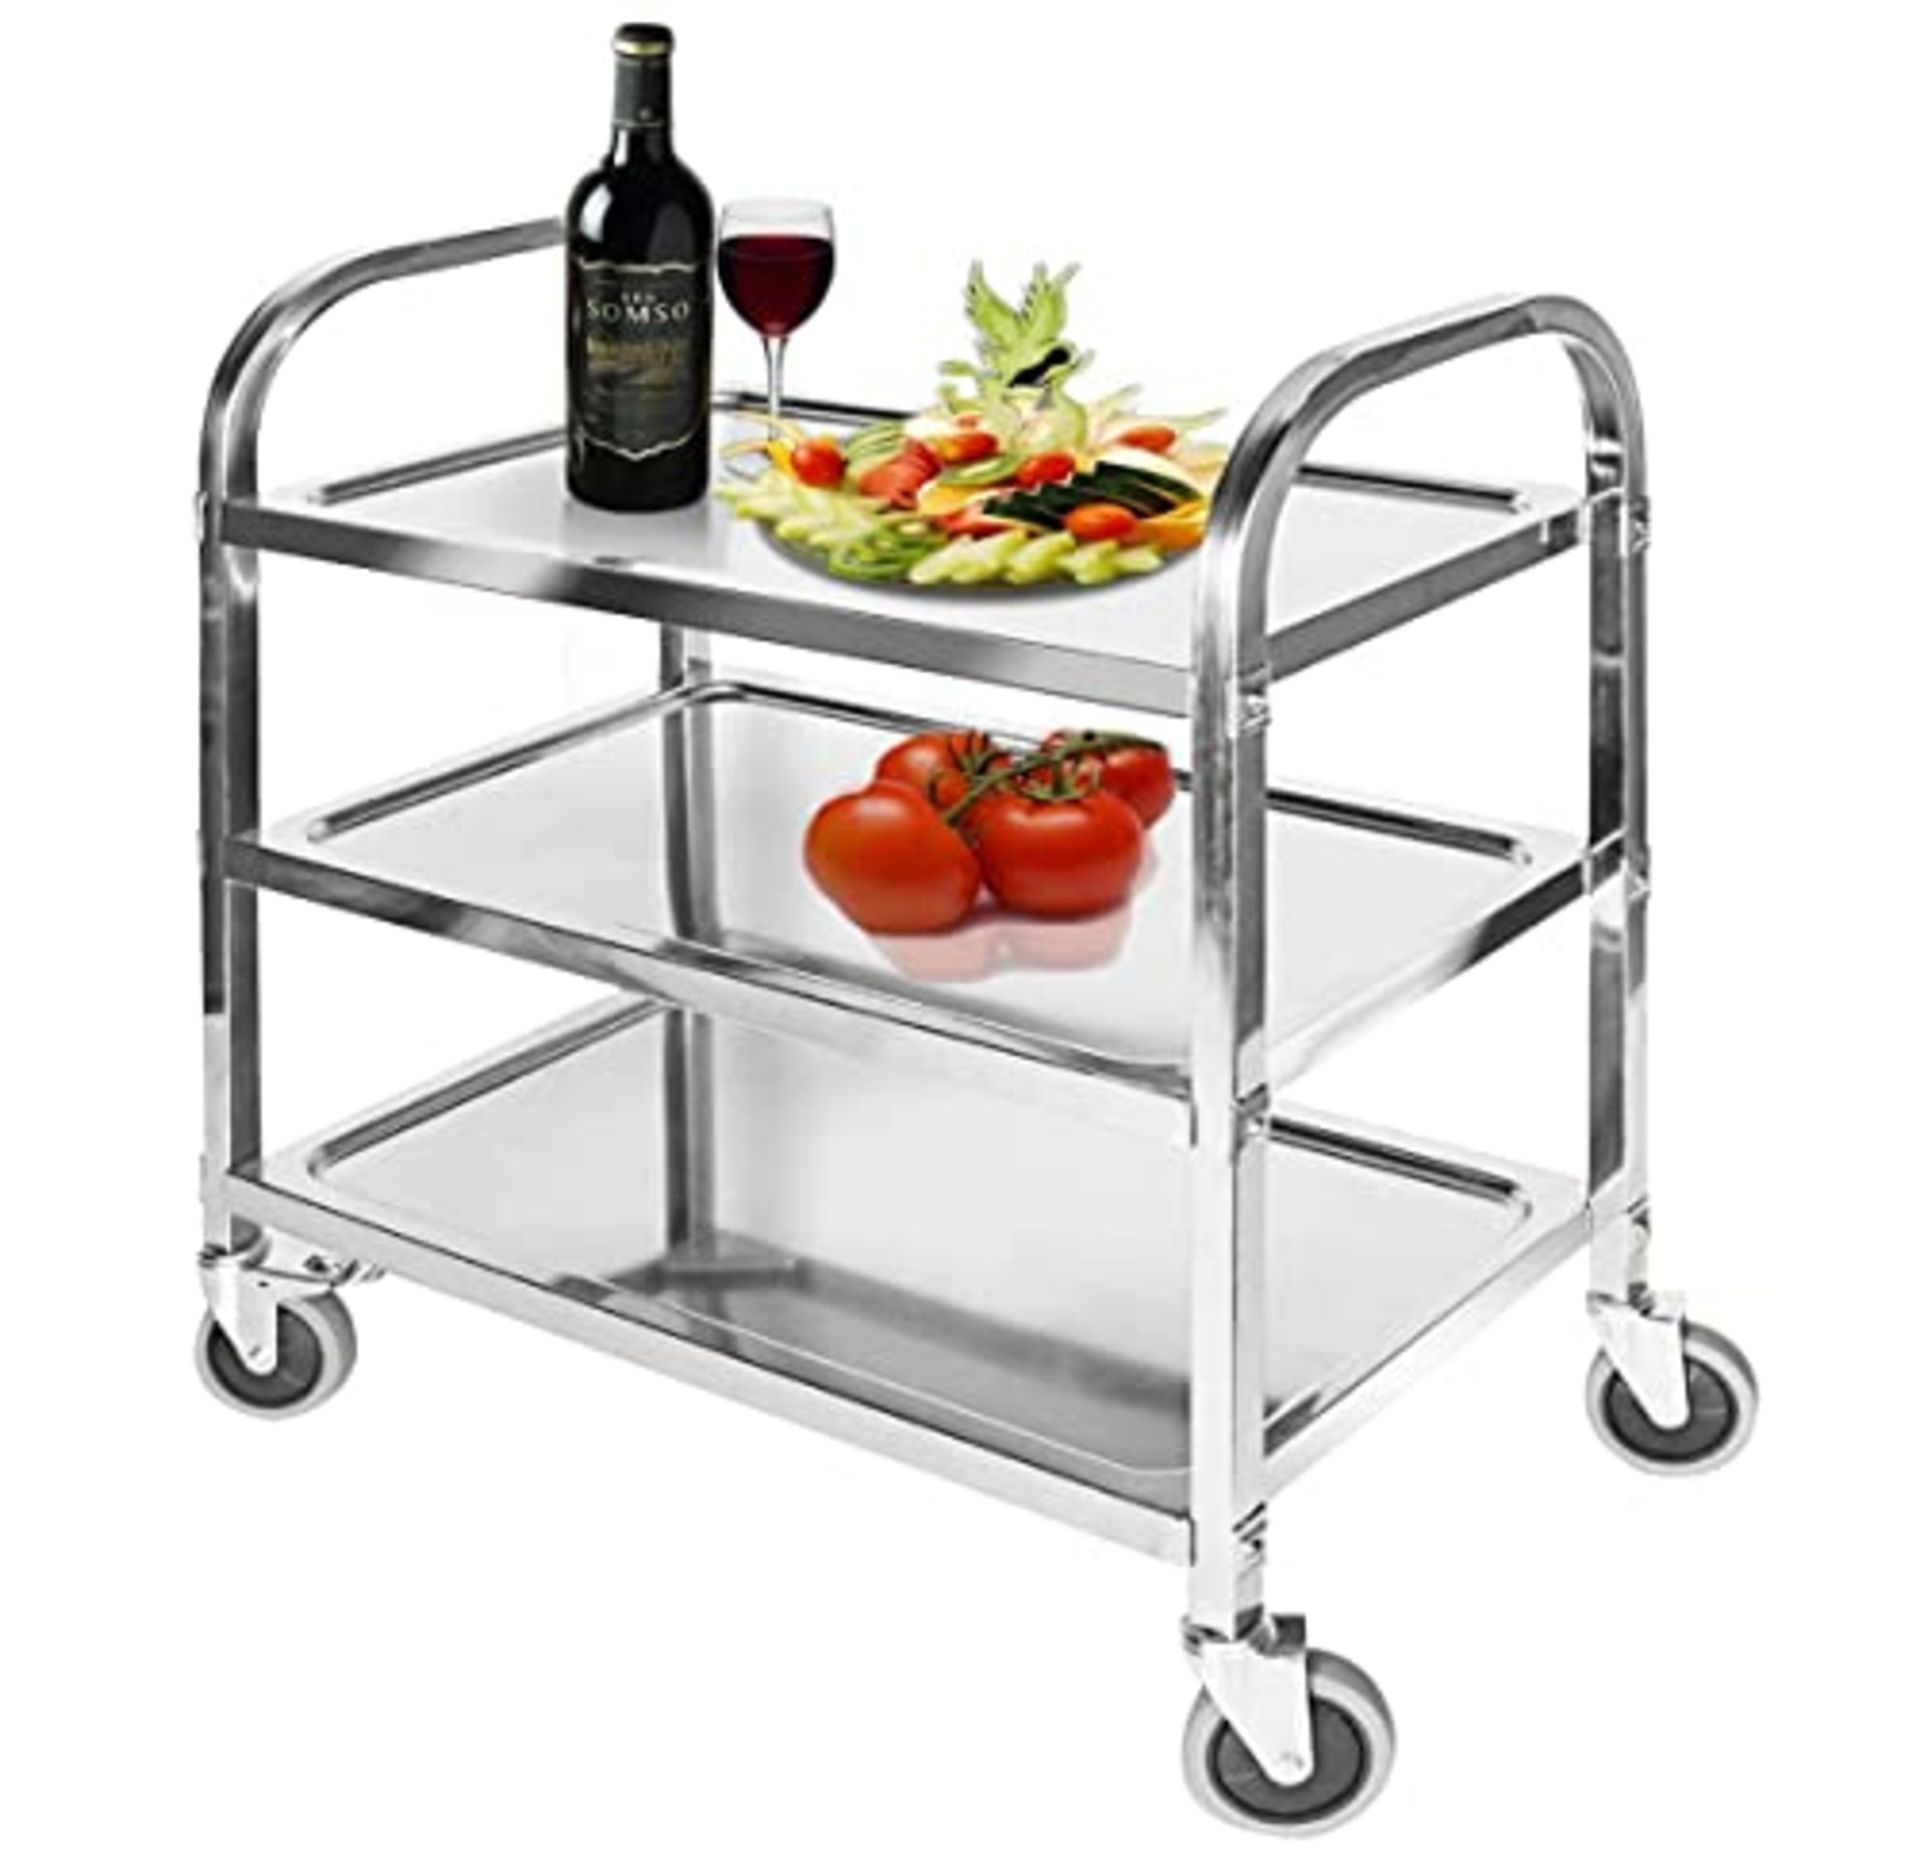 RRP £86.75 tonchean 3 Tier Stainless Steel Catering Trolley on